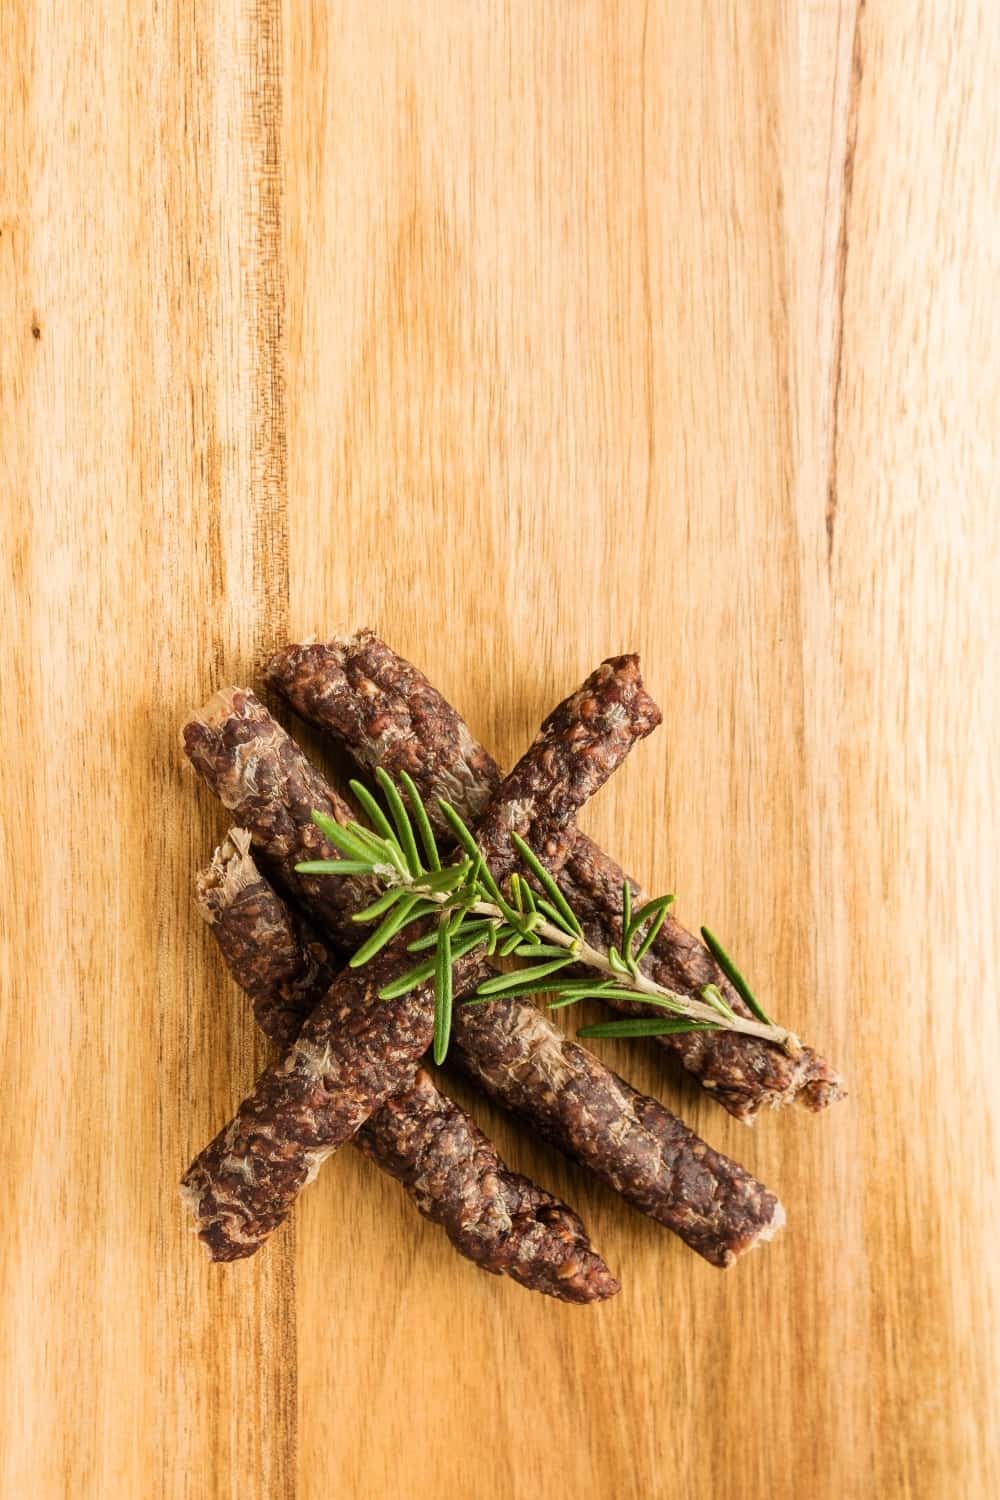 Droewors (biltong) with rosemary on a wooden board,